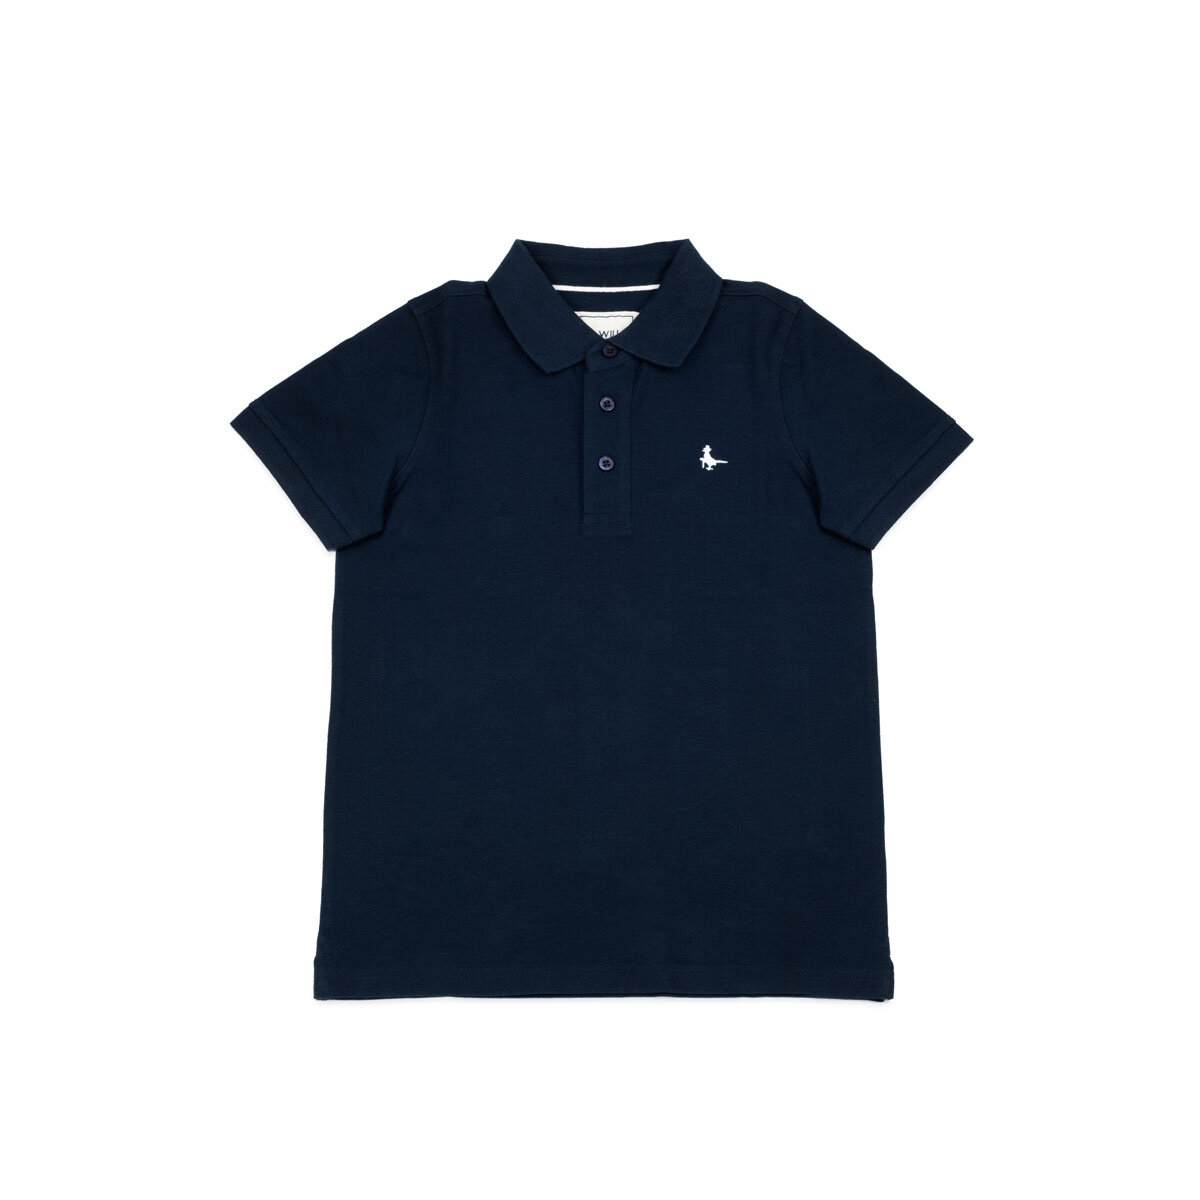 Jack Wills Youth Polo in Navy